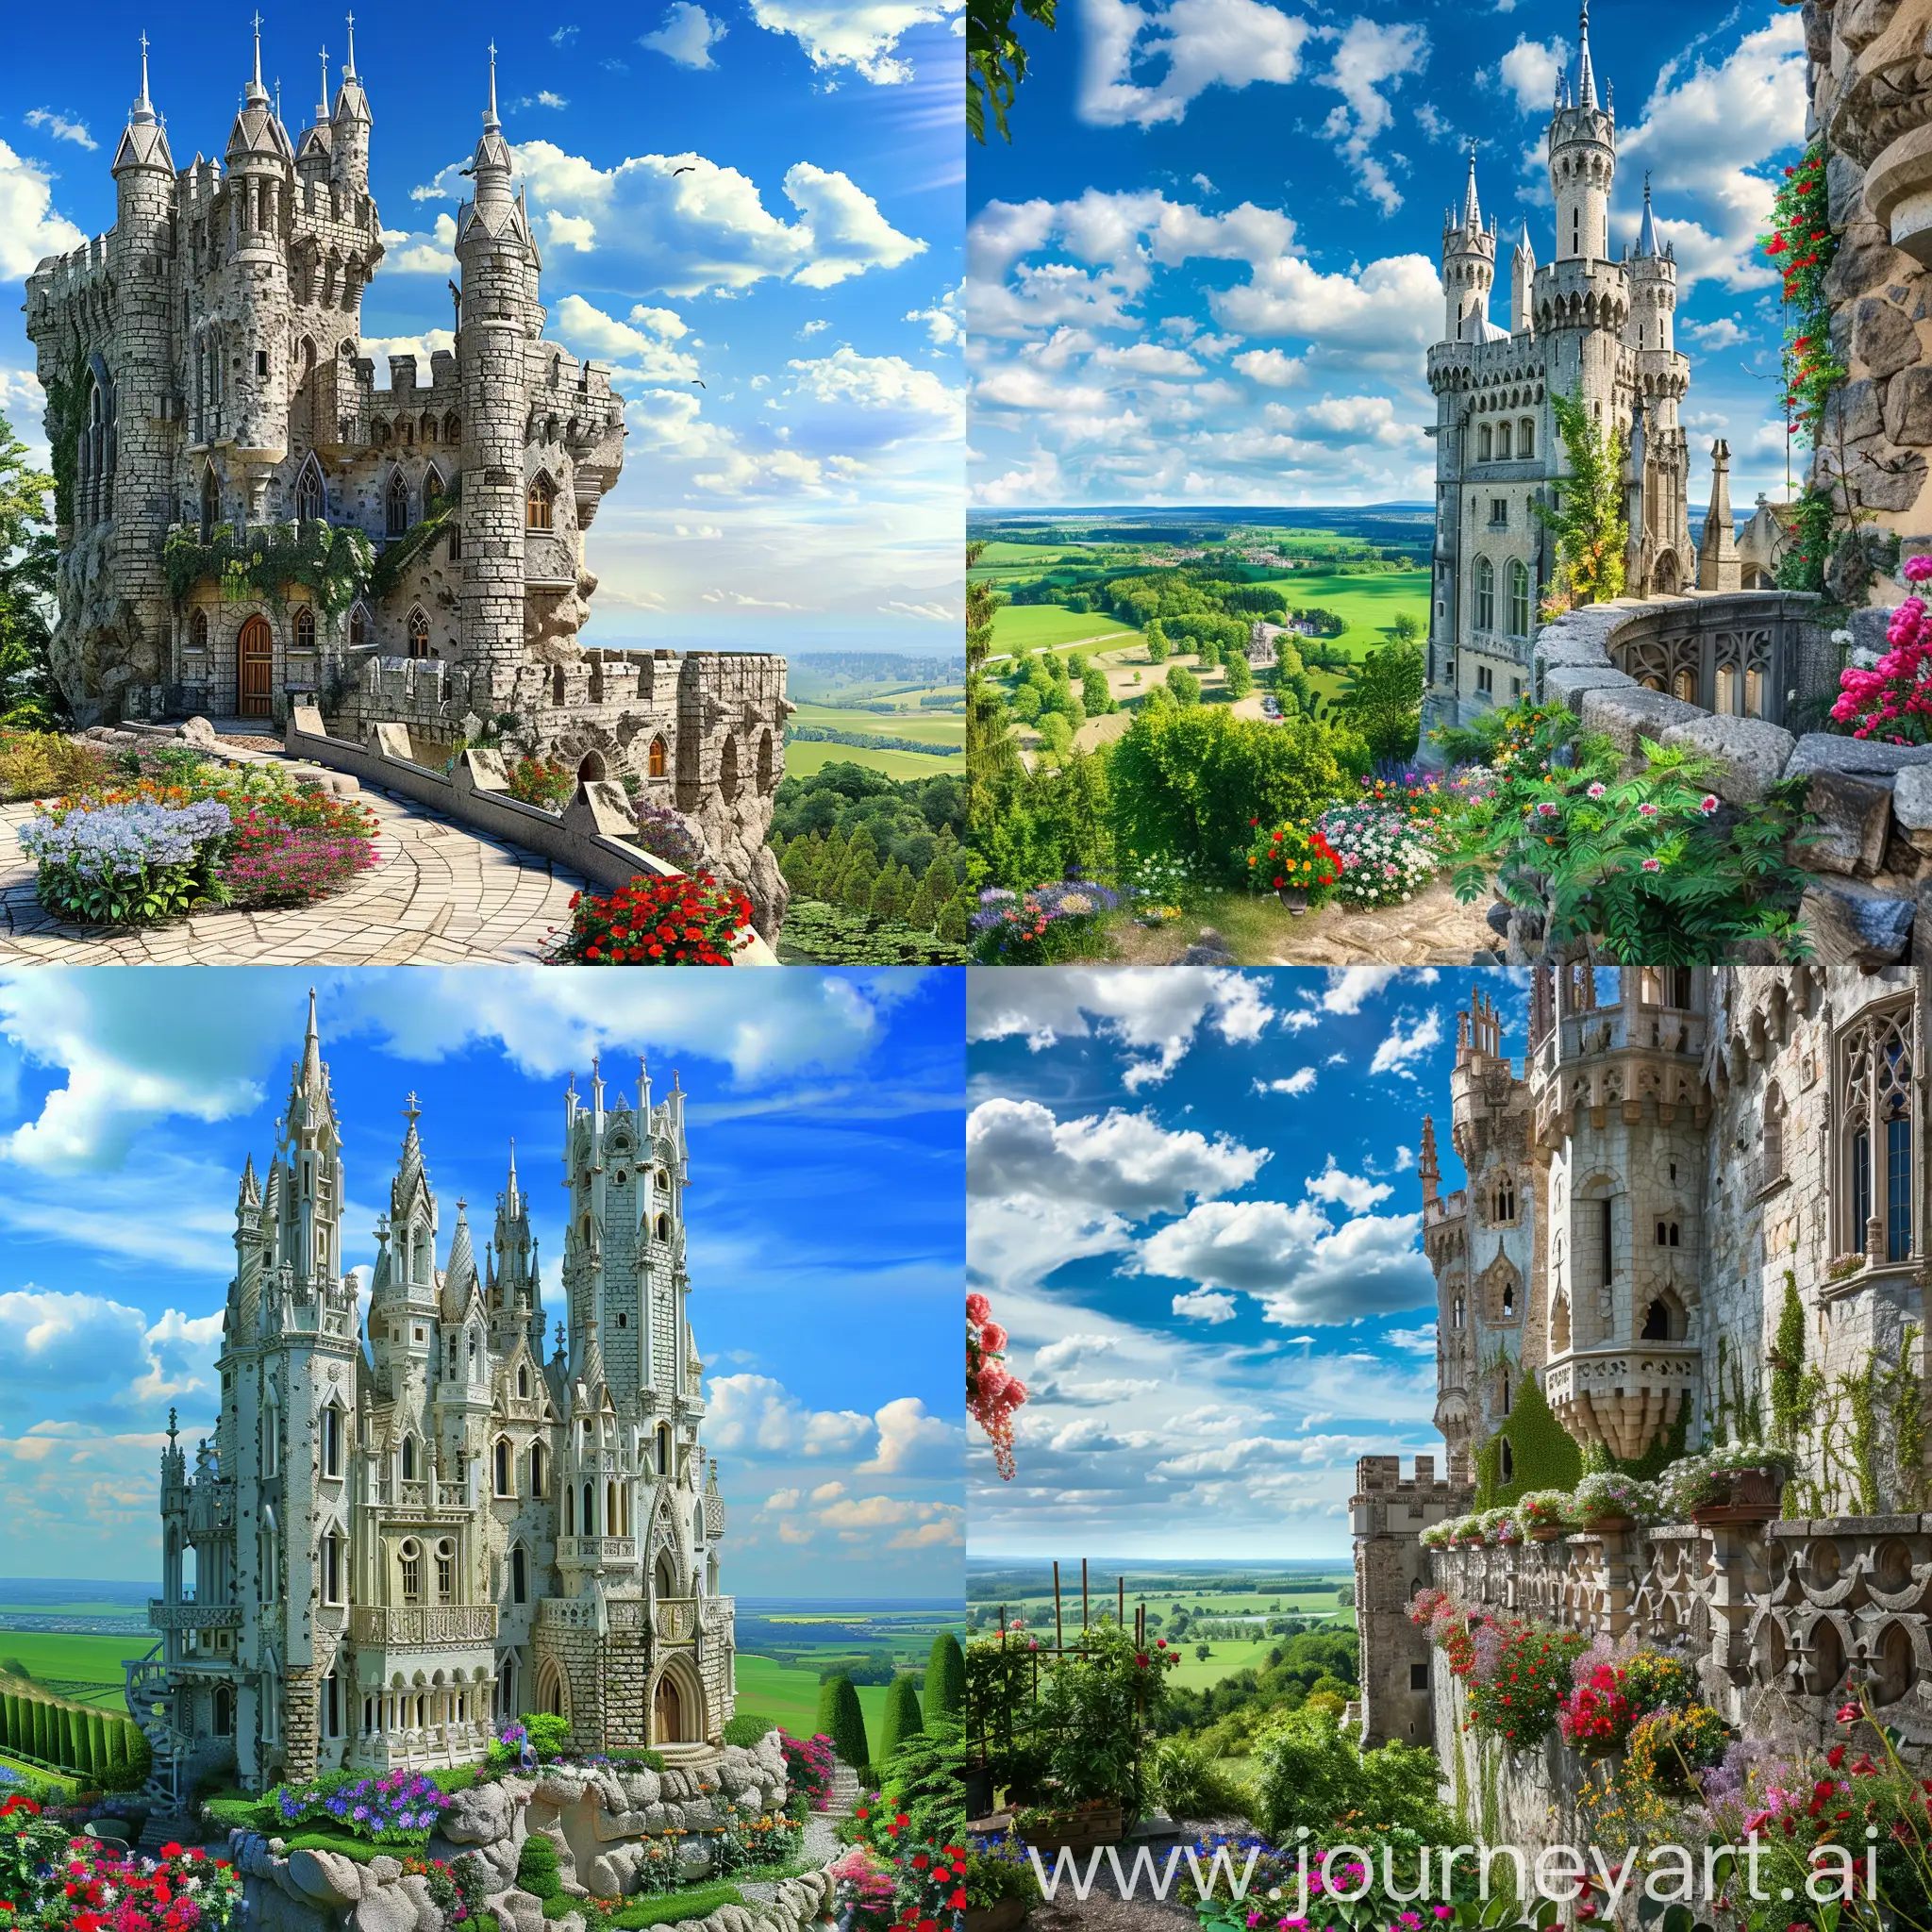 The castle is realistic in Gothic style, with a blue sky background, next to a garden with flowers and a green landscape